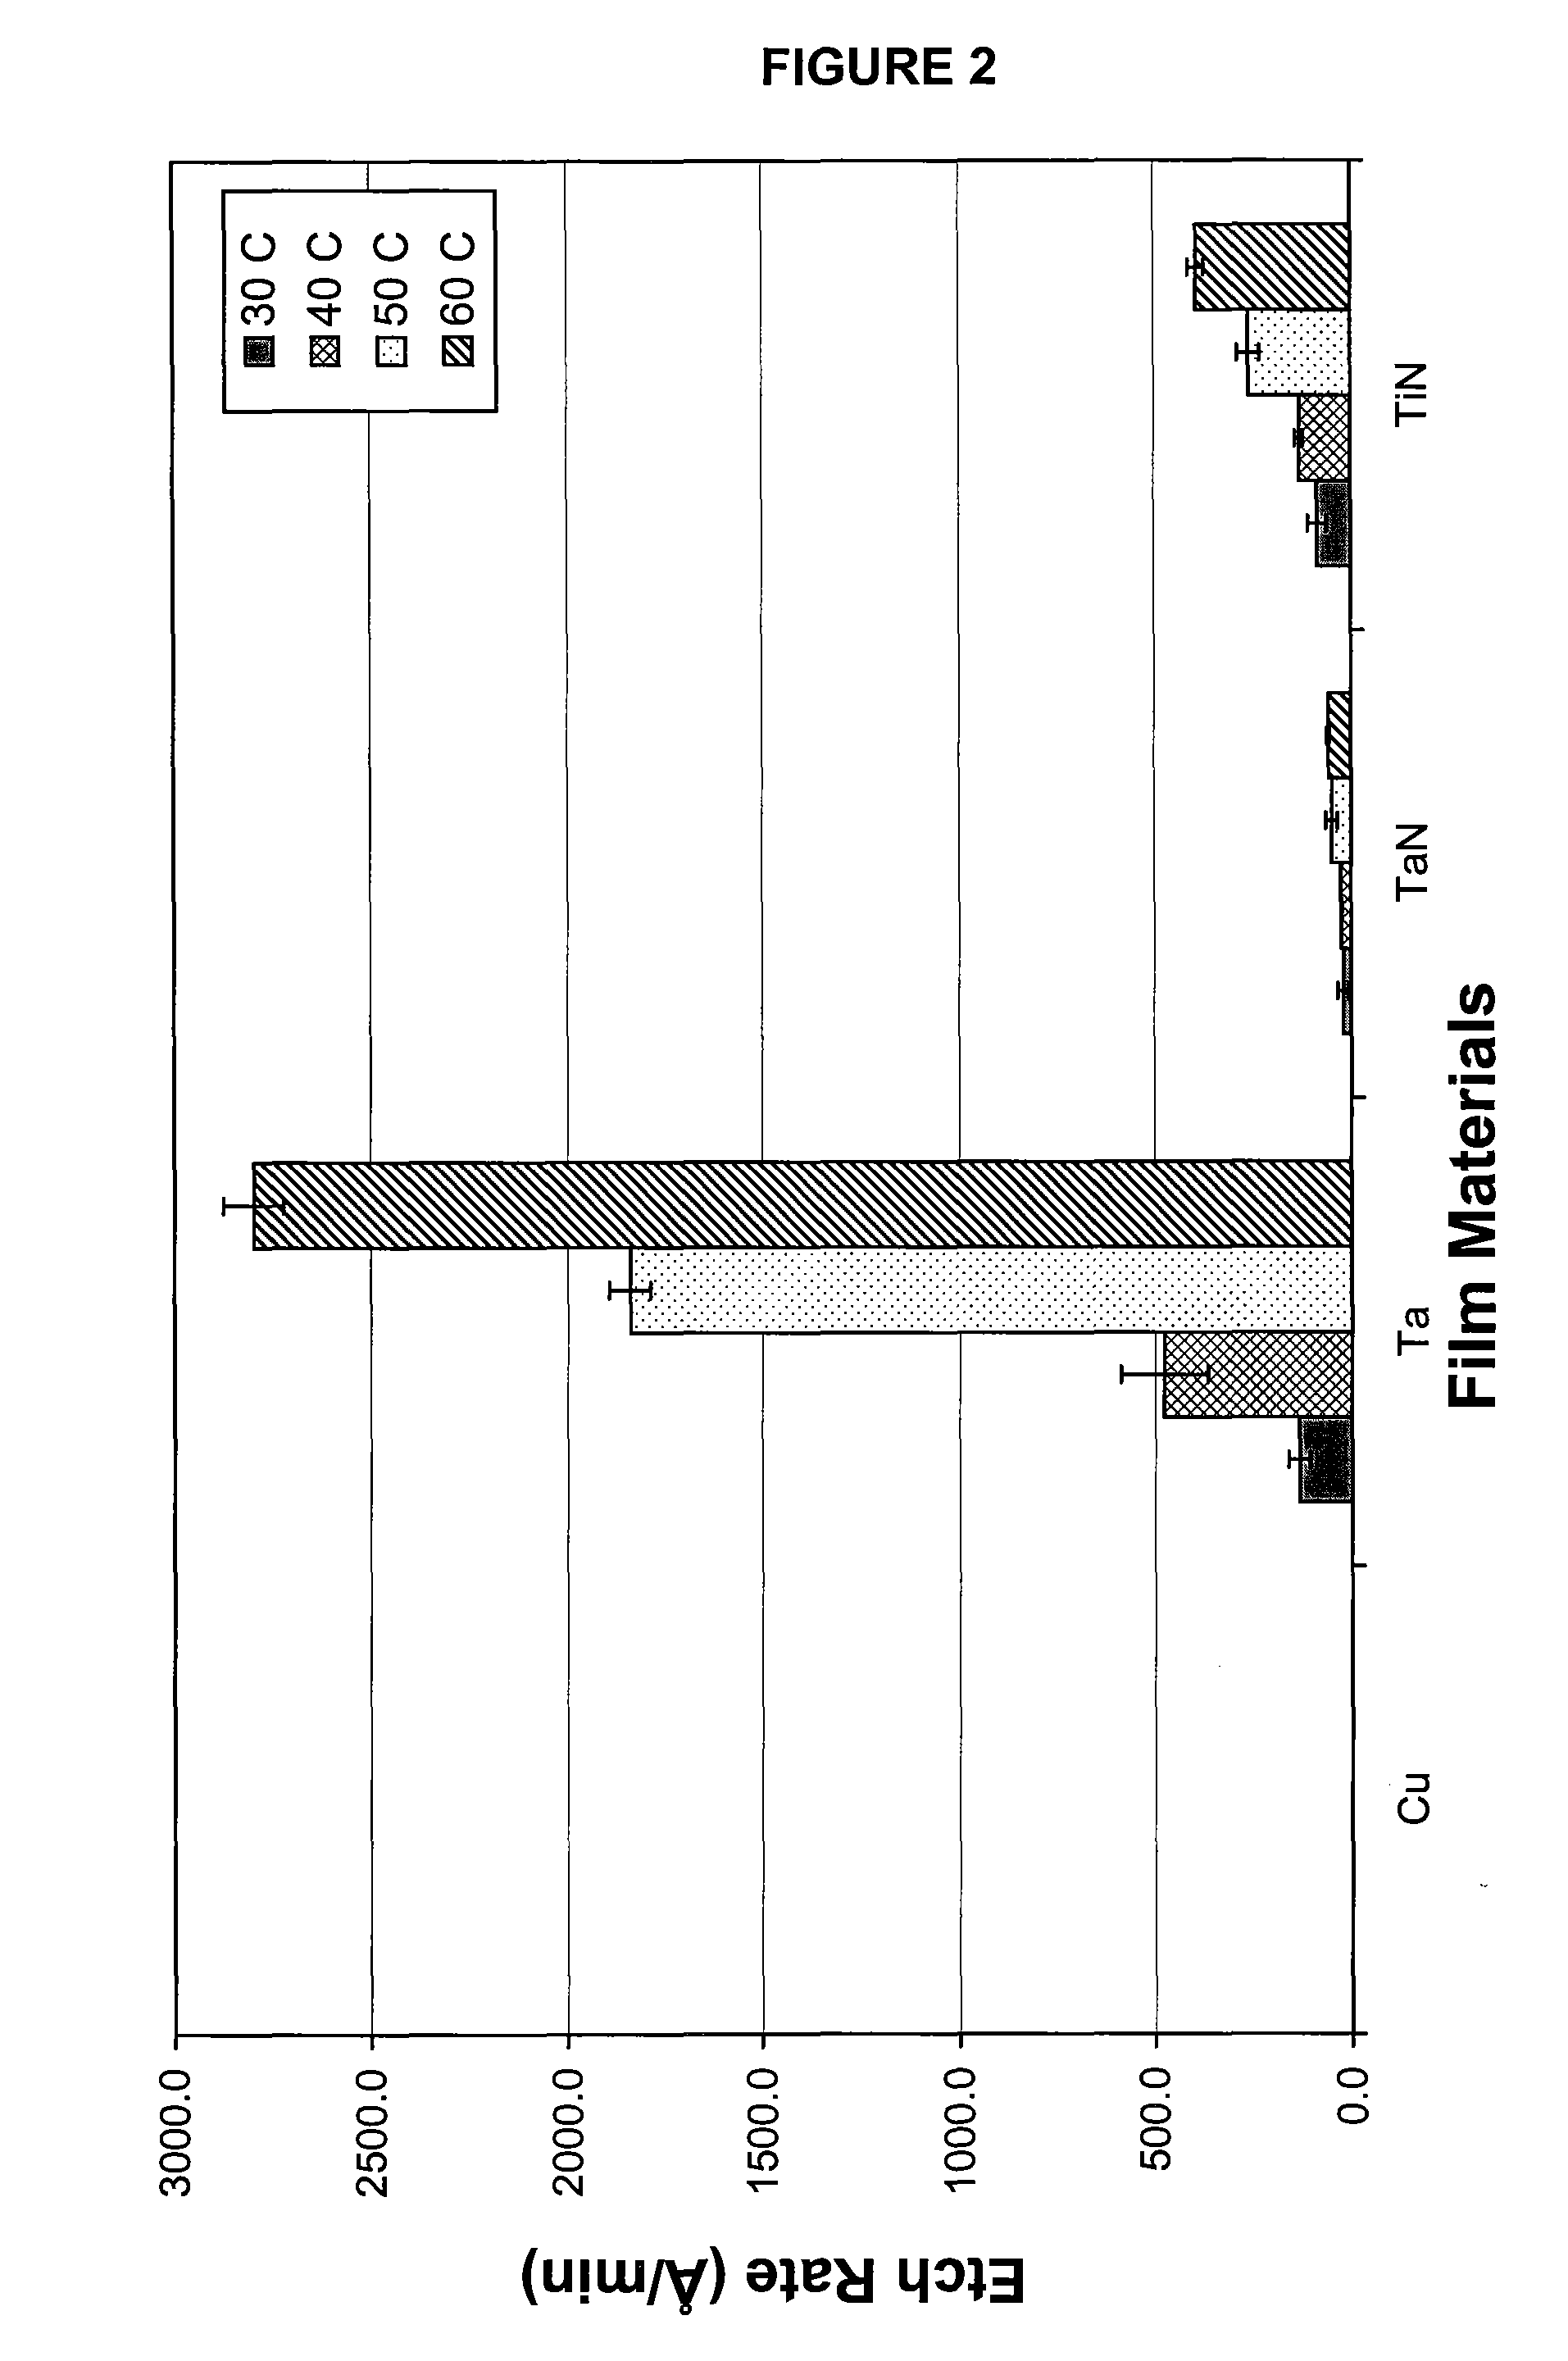 Composition and Method for Recycling Semiconductor Wafers Having Low-K Dielectric Materials Thereon